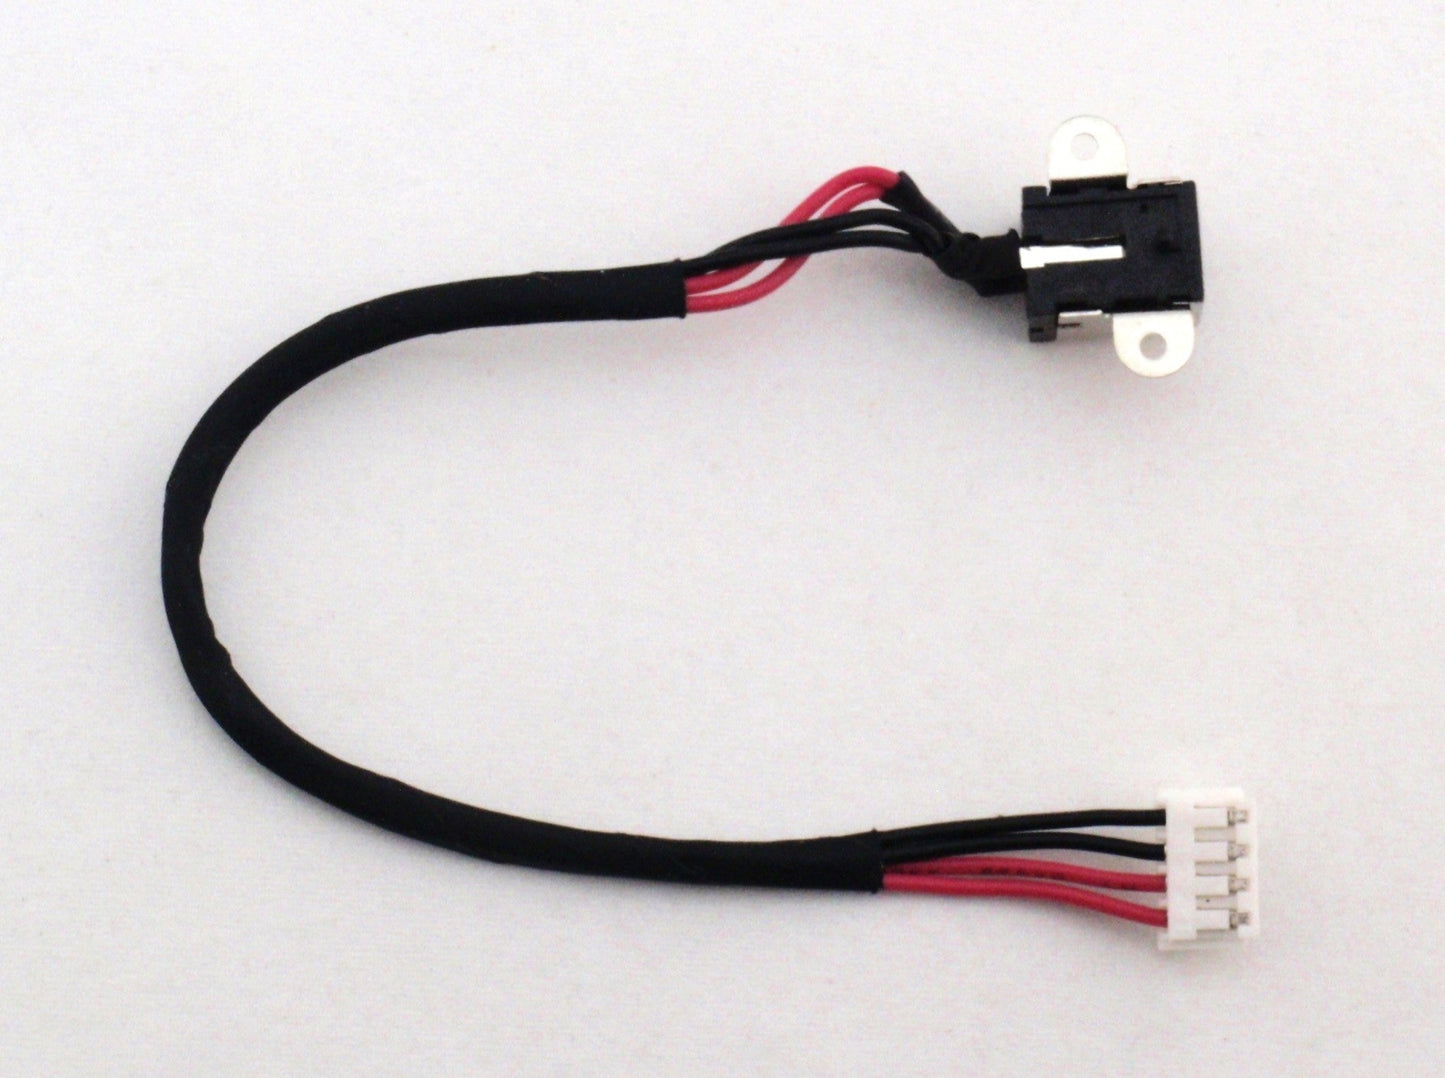 ASUS DC In Power Jack Charging Port Cable 14G140301000 PRO5Q PRO5QSF PRO5QSL U43 U43F UL80 UL80J UL80V X5Q X5QSF X5QSL 1414-02X0000